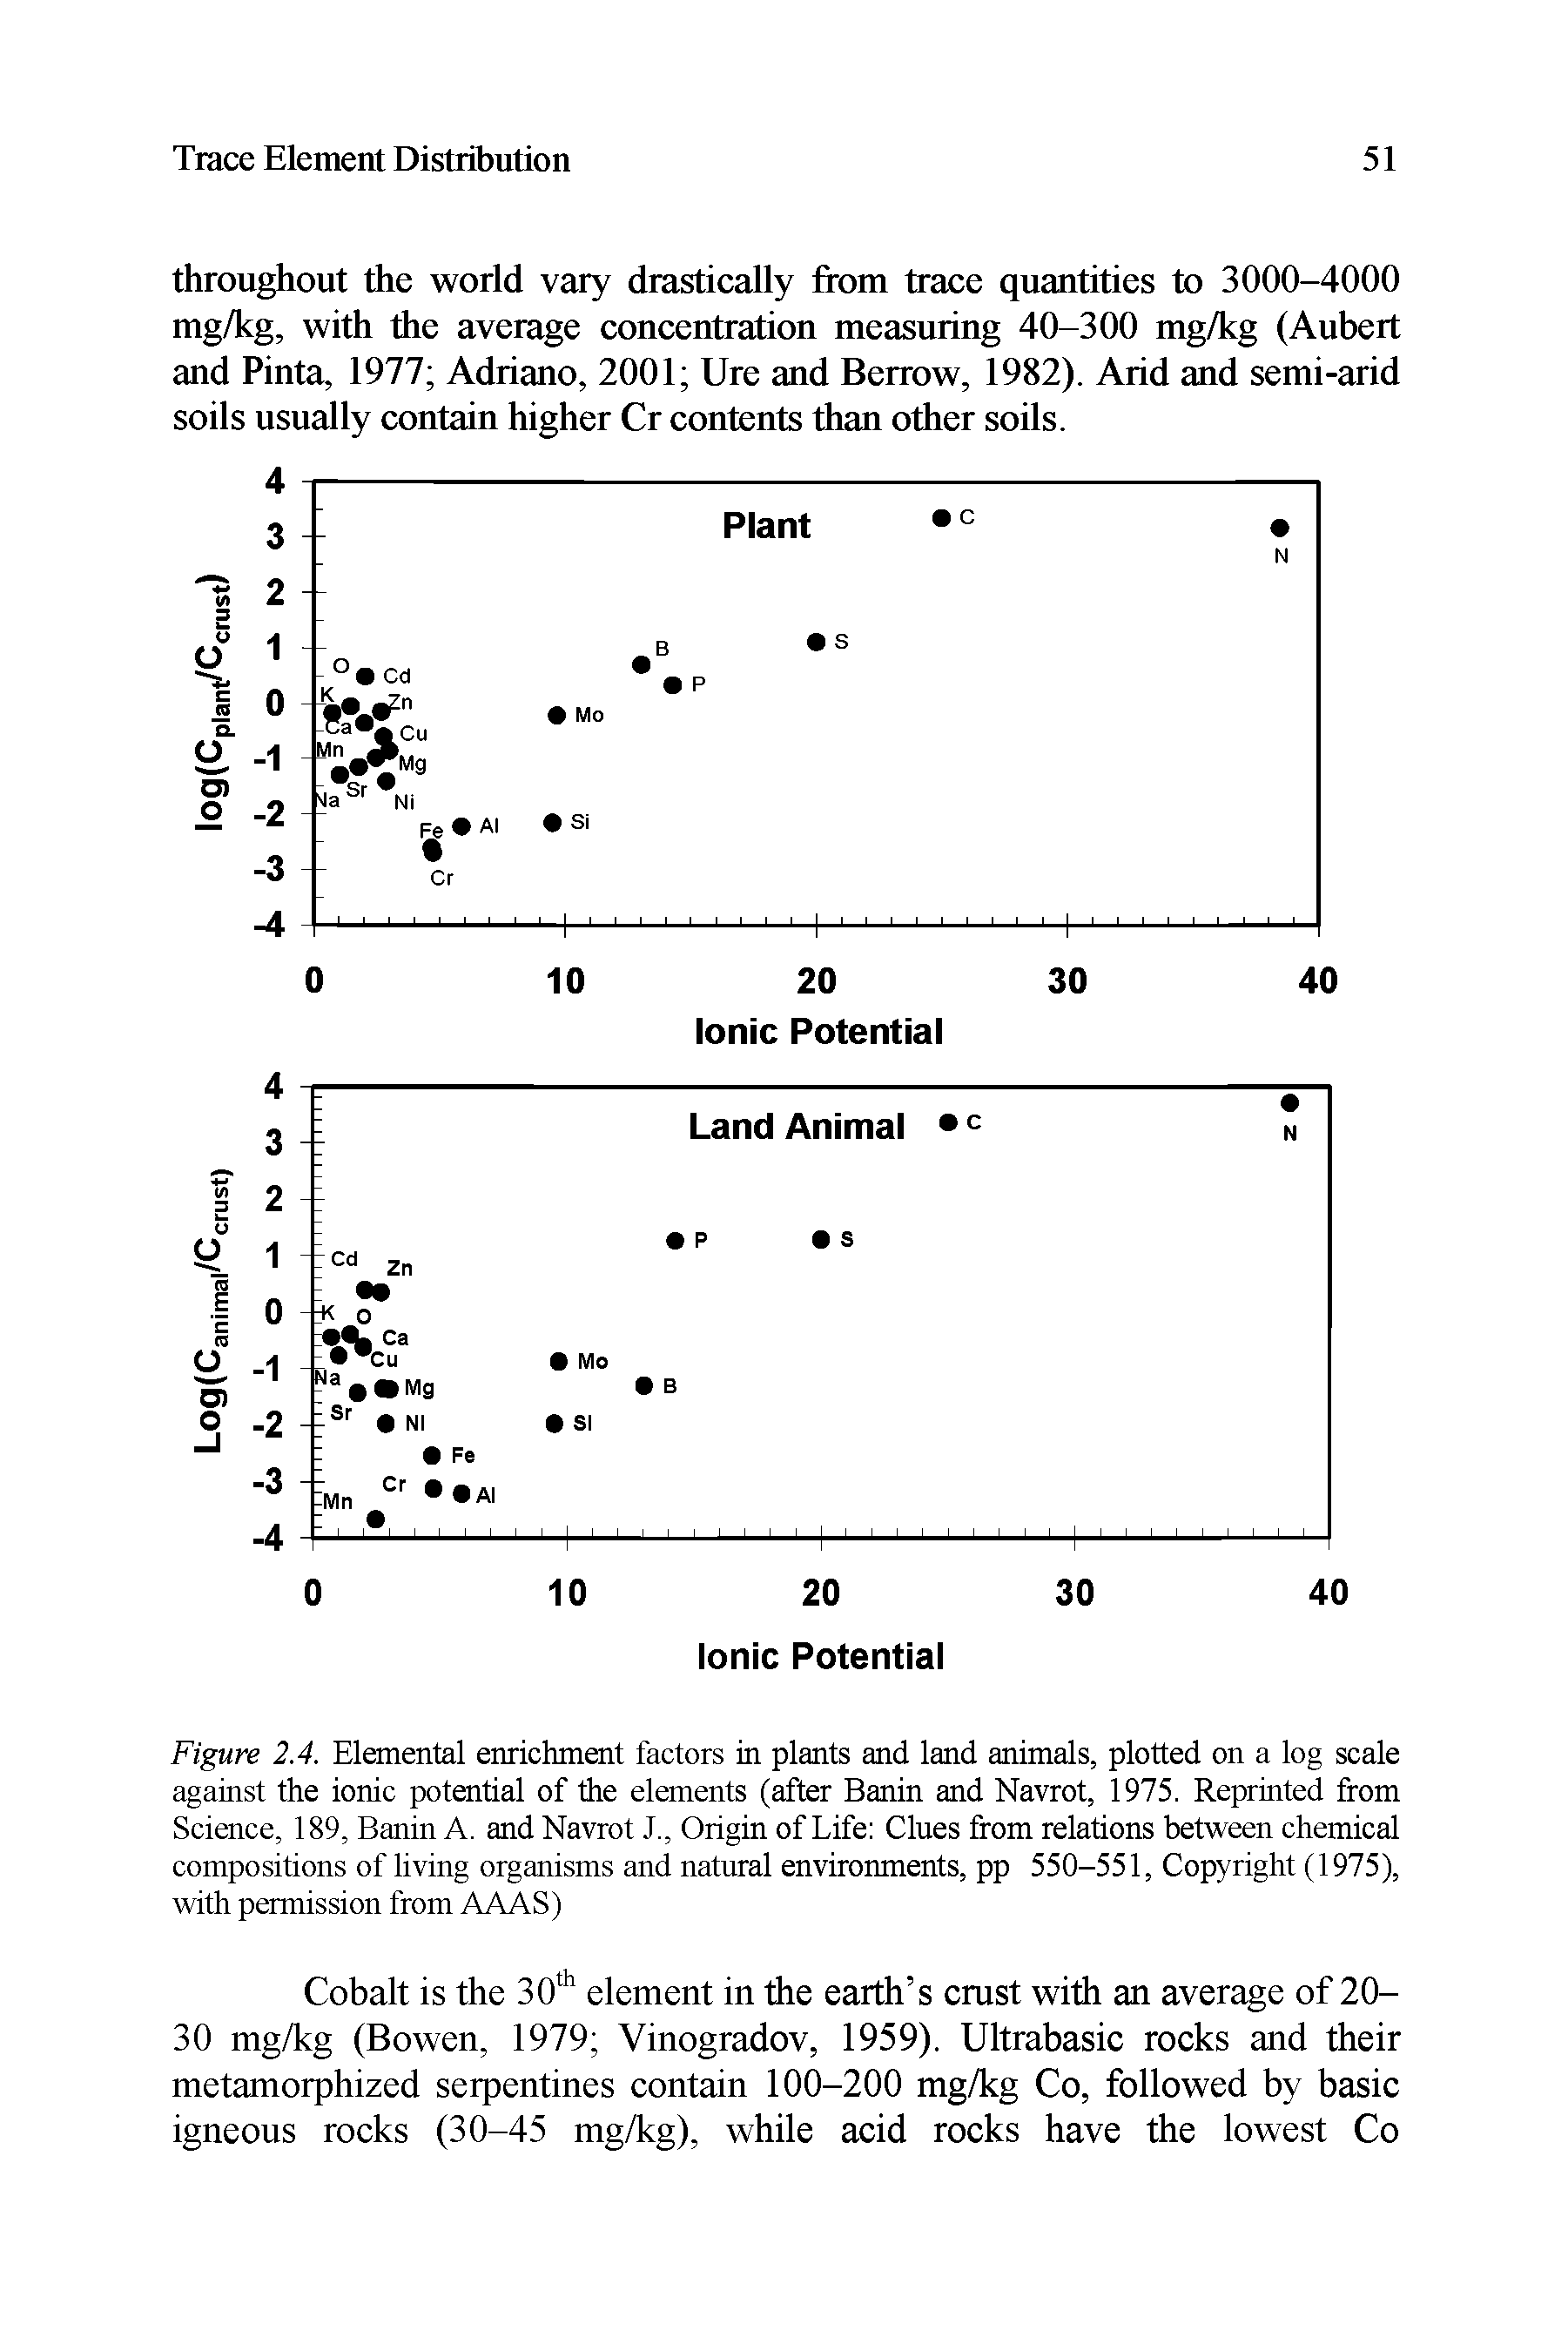 Figure 2.4. Elemental enrichment factors in plants and land animals, plotted on a log scale against the ionic potential of the elements (after Banin and Navrot, 1975. Reprinted from Science, 189, Banin A. and Navrot I, Origin of Life Clues from relations between chemical compositions of living organisms and natural environments, pp 550-551, Copyright (1975), with permission from AAAS)...